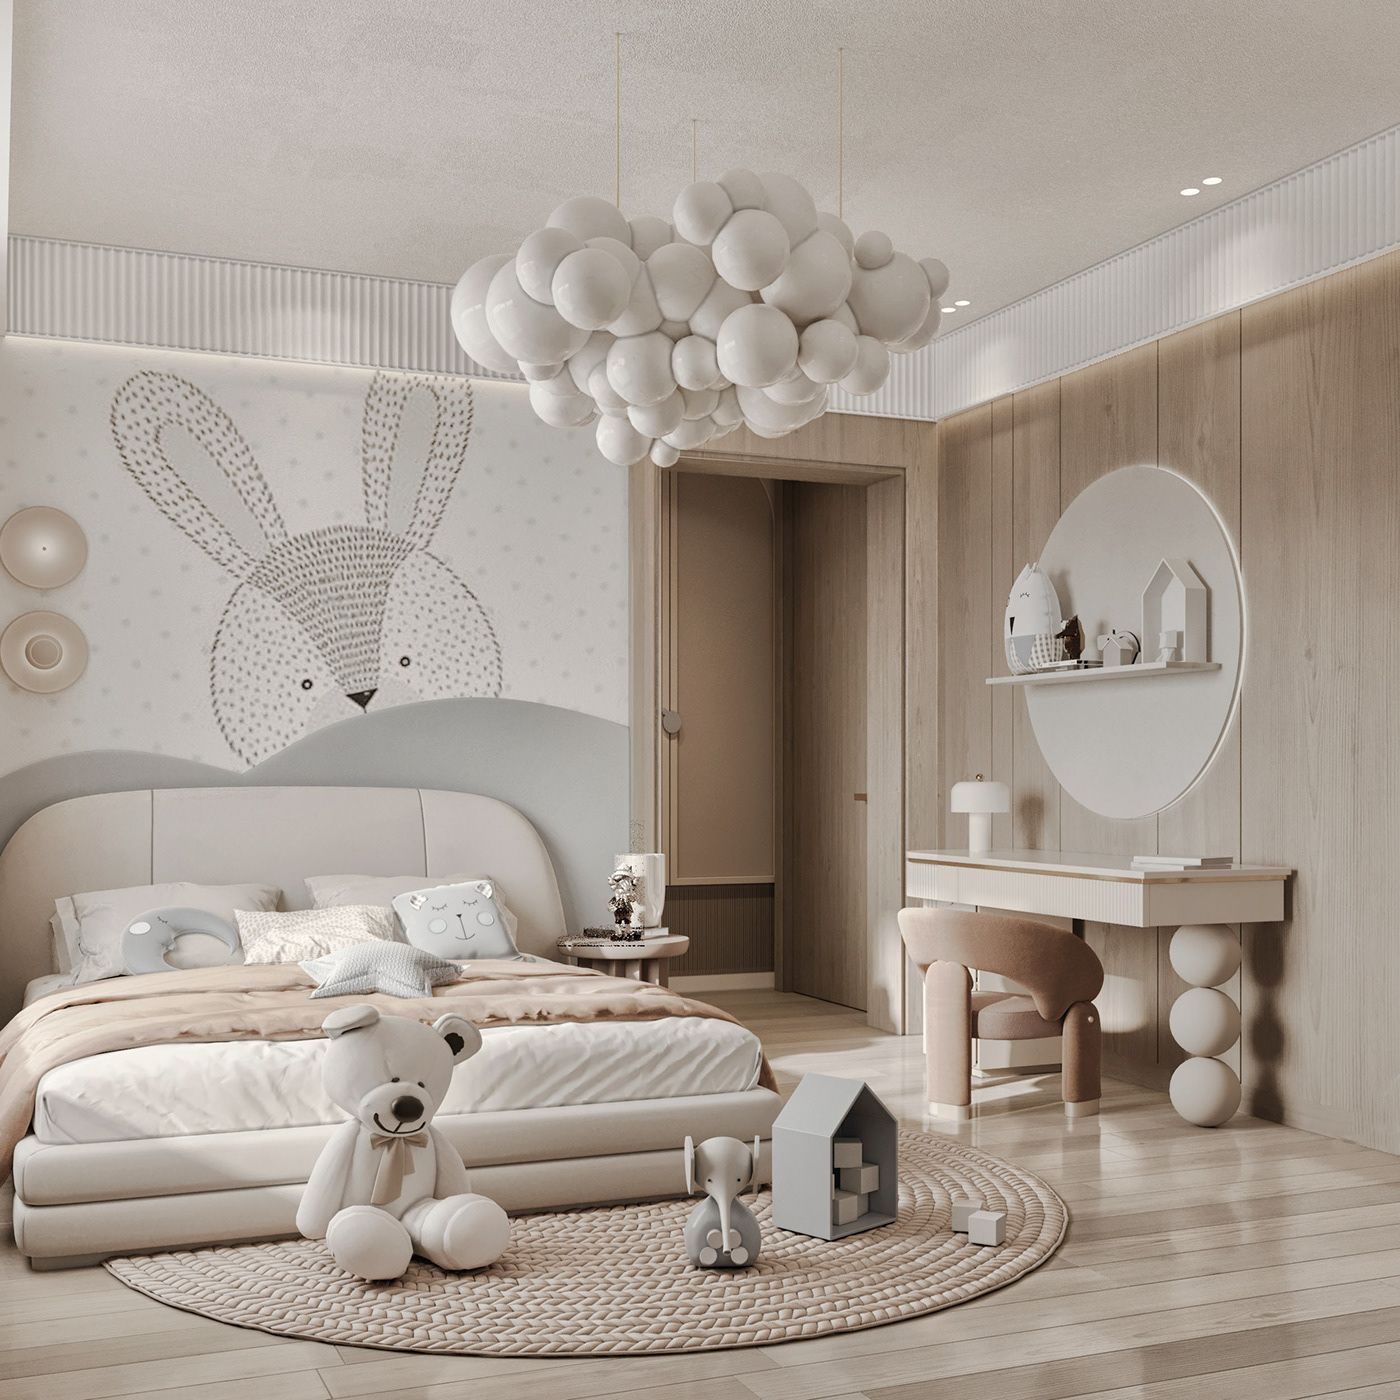 Designing a Dreamy Children’s Bedroom:
Furniture Must-Haves and Decor Ideas